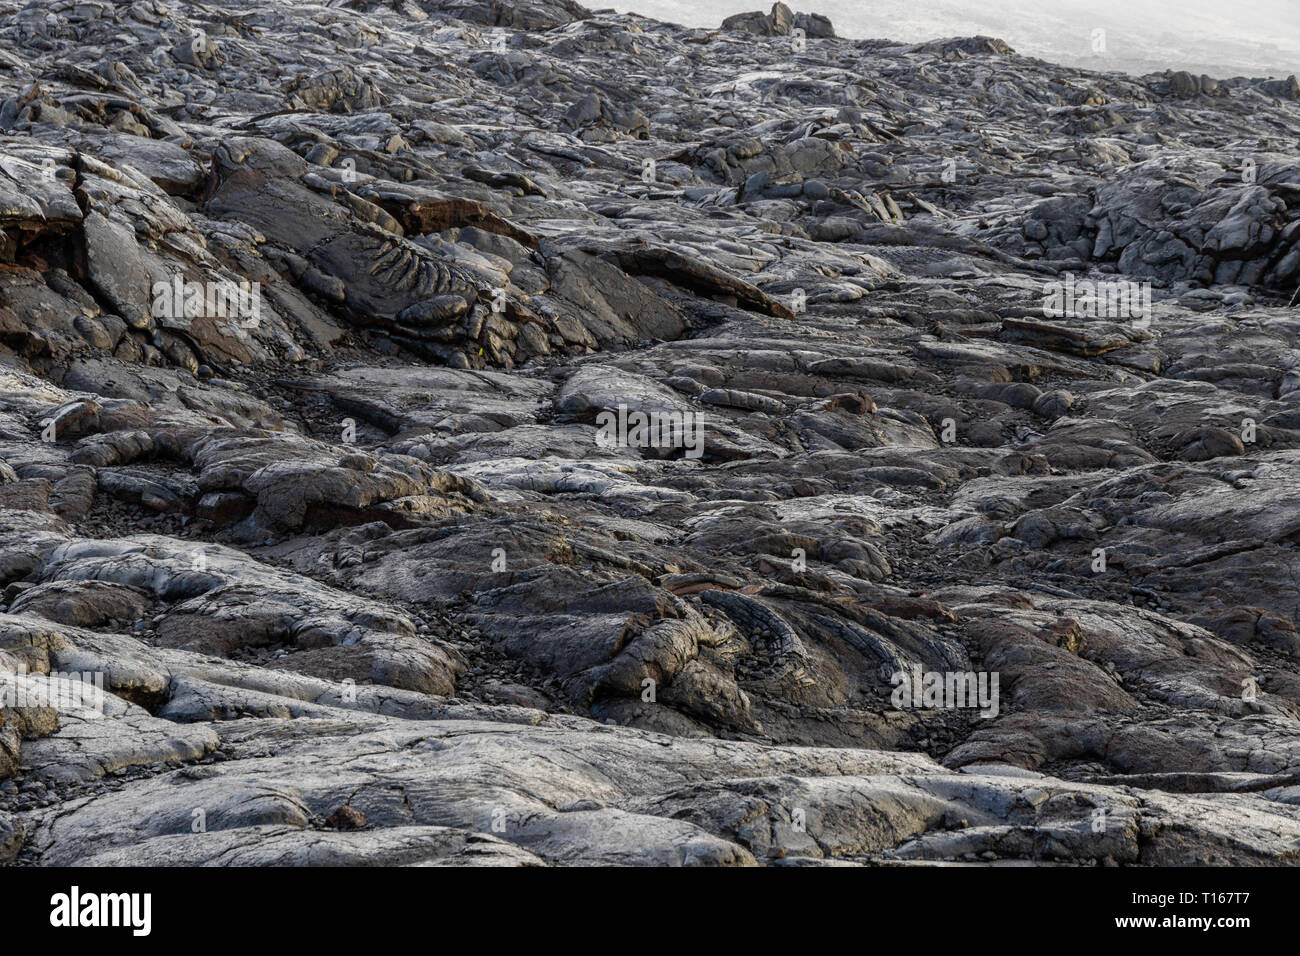 Pahoehoe lava field on Hawaii's Big Island. Chain of Craters Road, Volcano National Park. Stock Photo